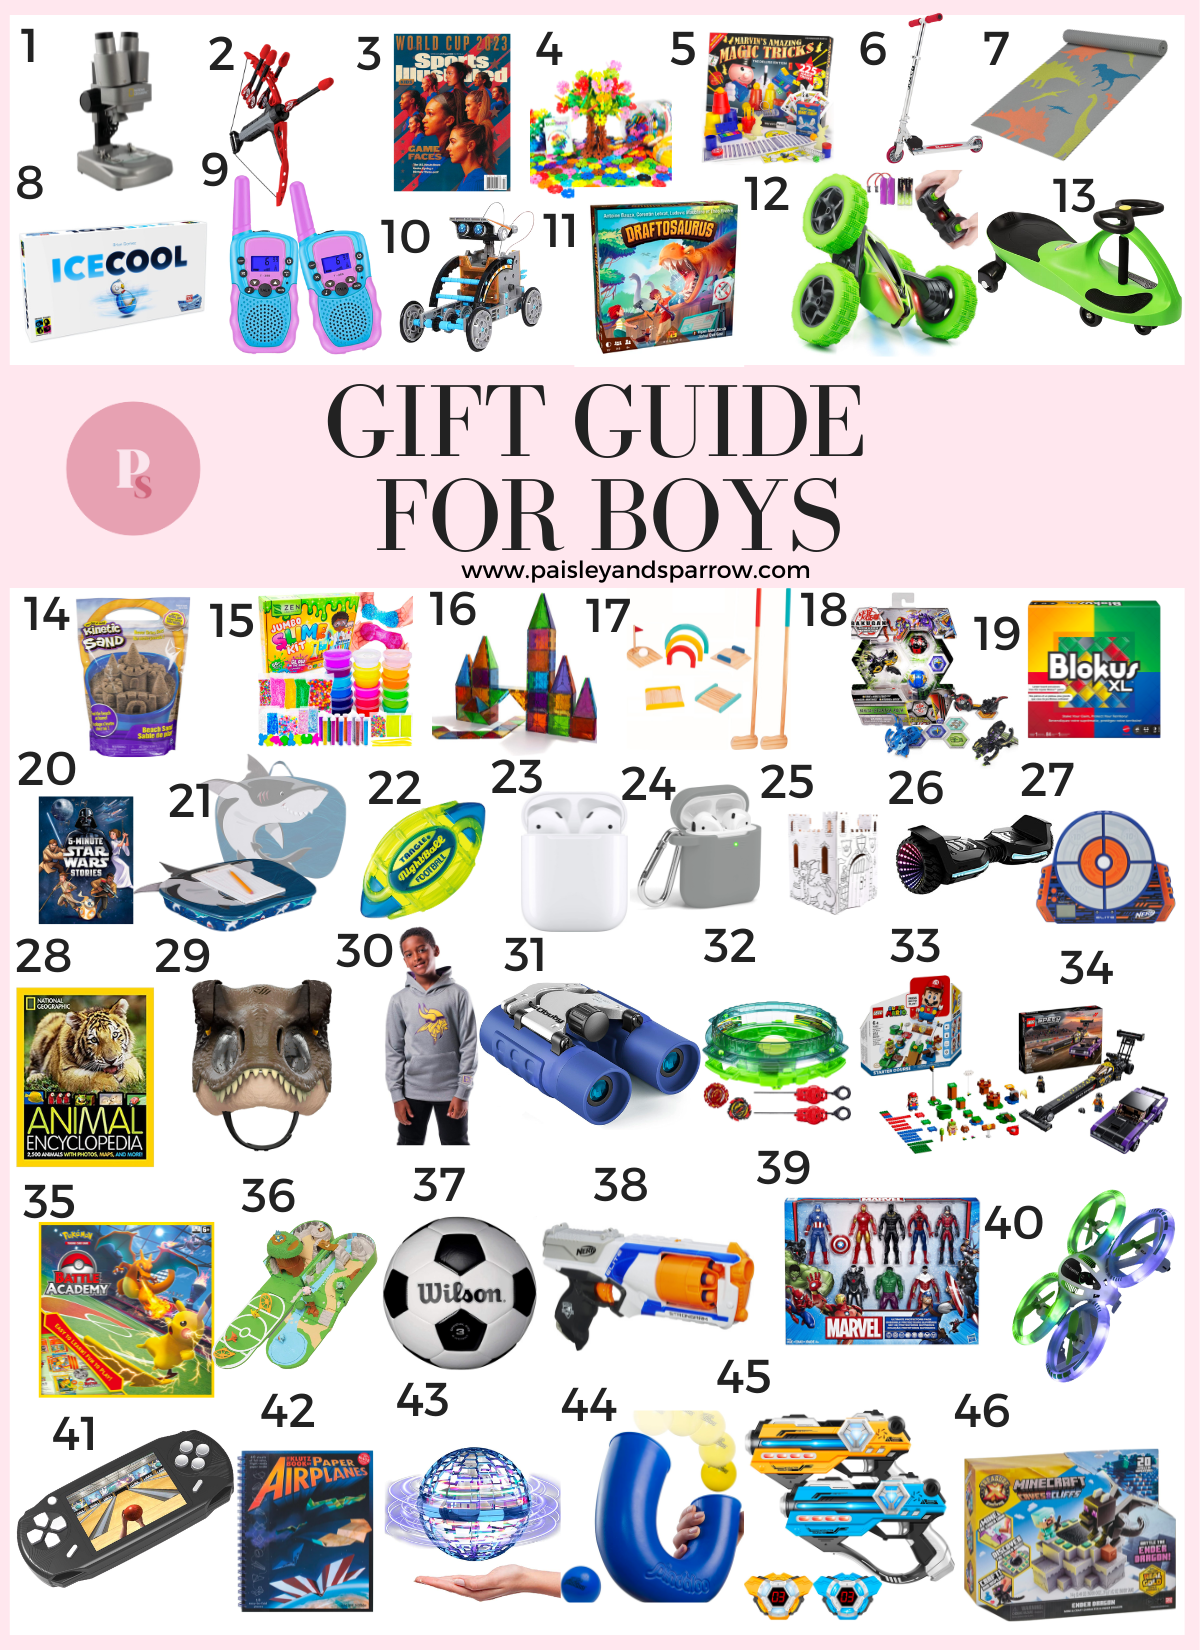 Gifts for Kids on Amazon | life and style | Fresh Mommy Blog